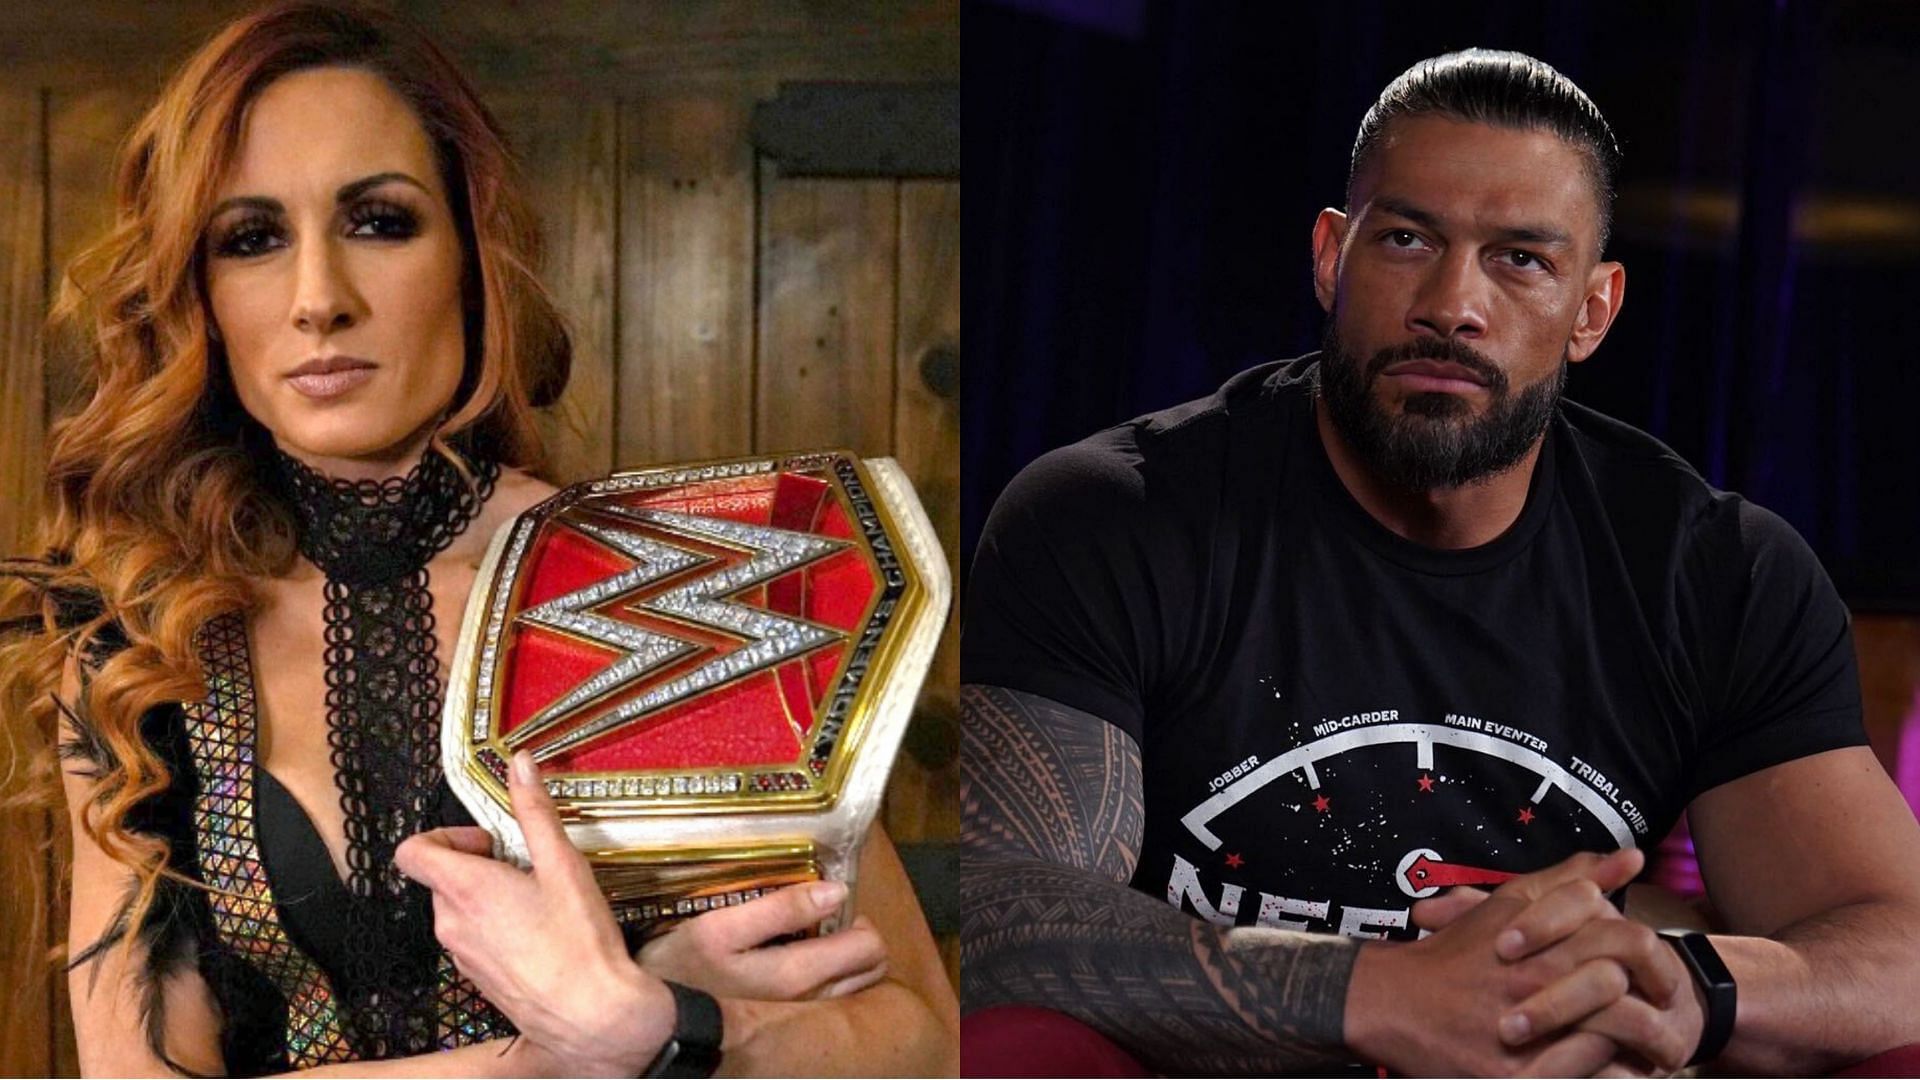 Top champions Becky Lynch and Roman Reigns